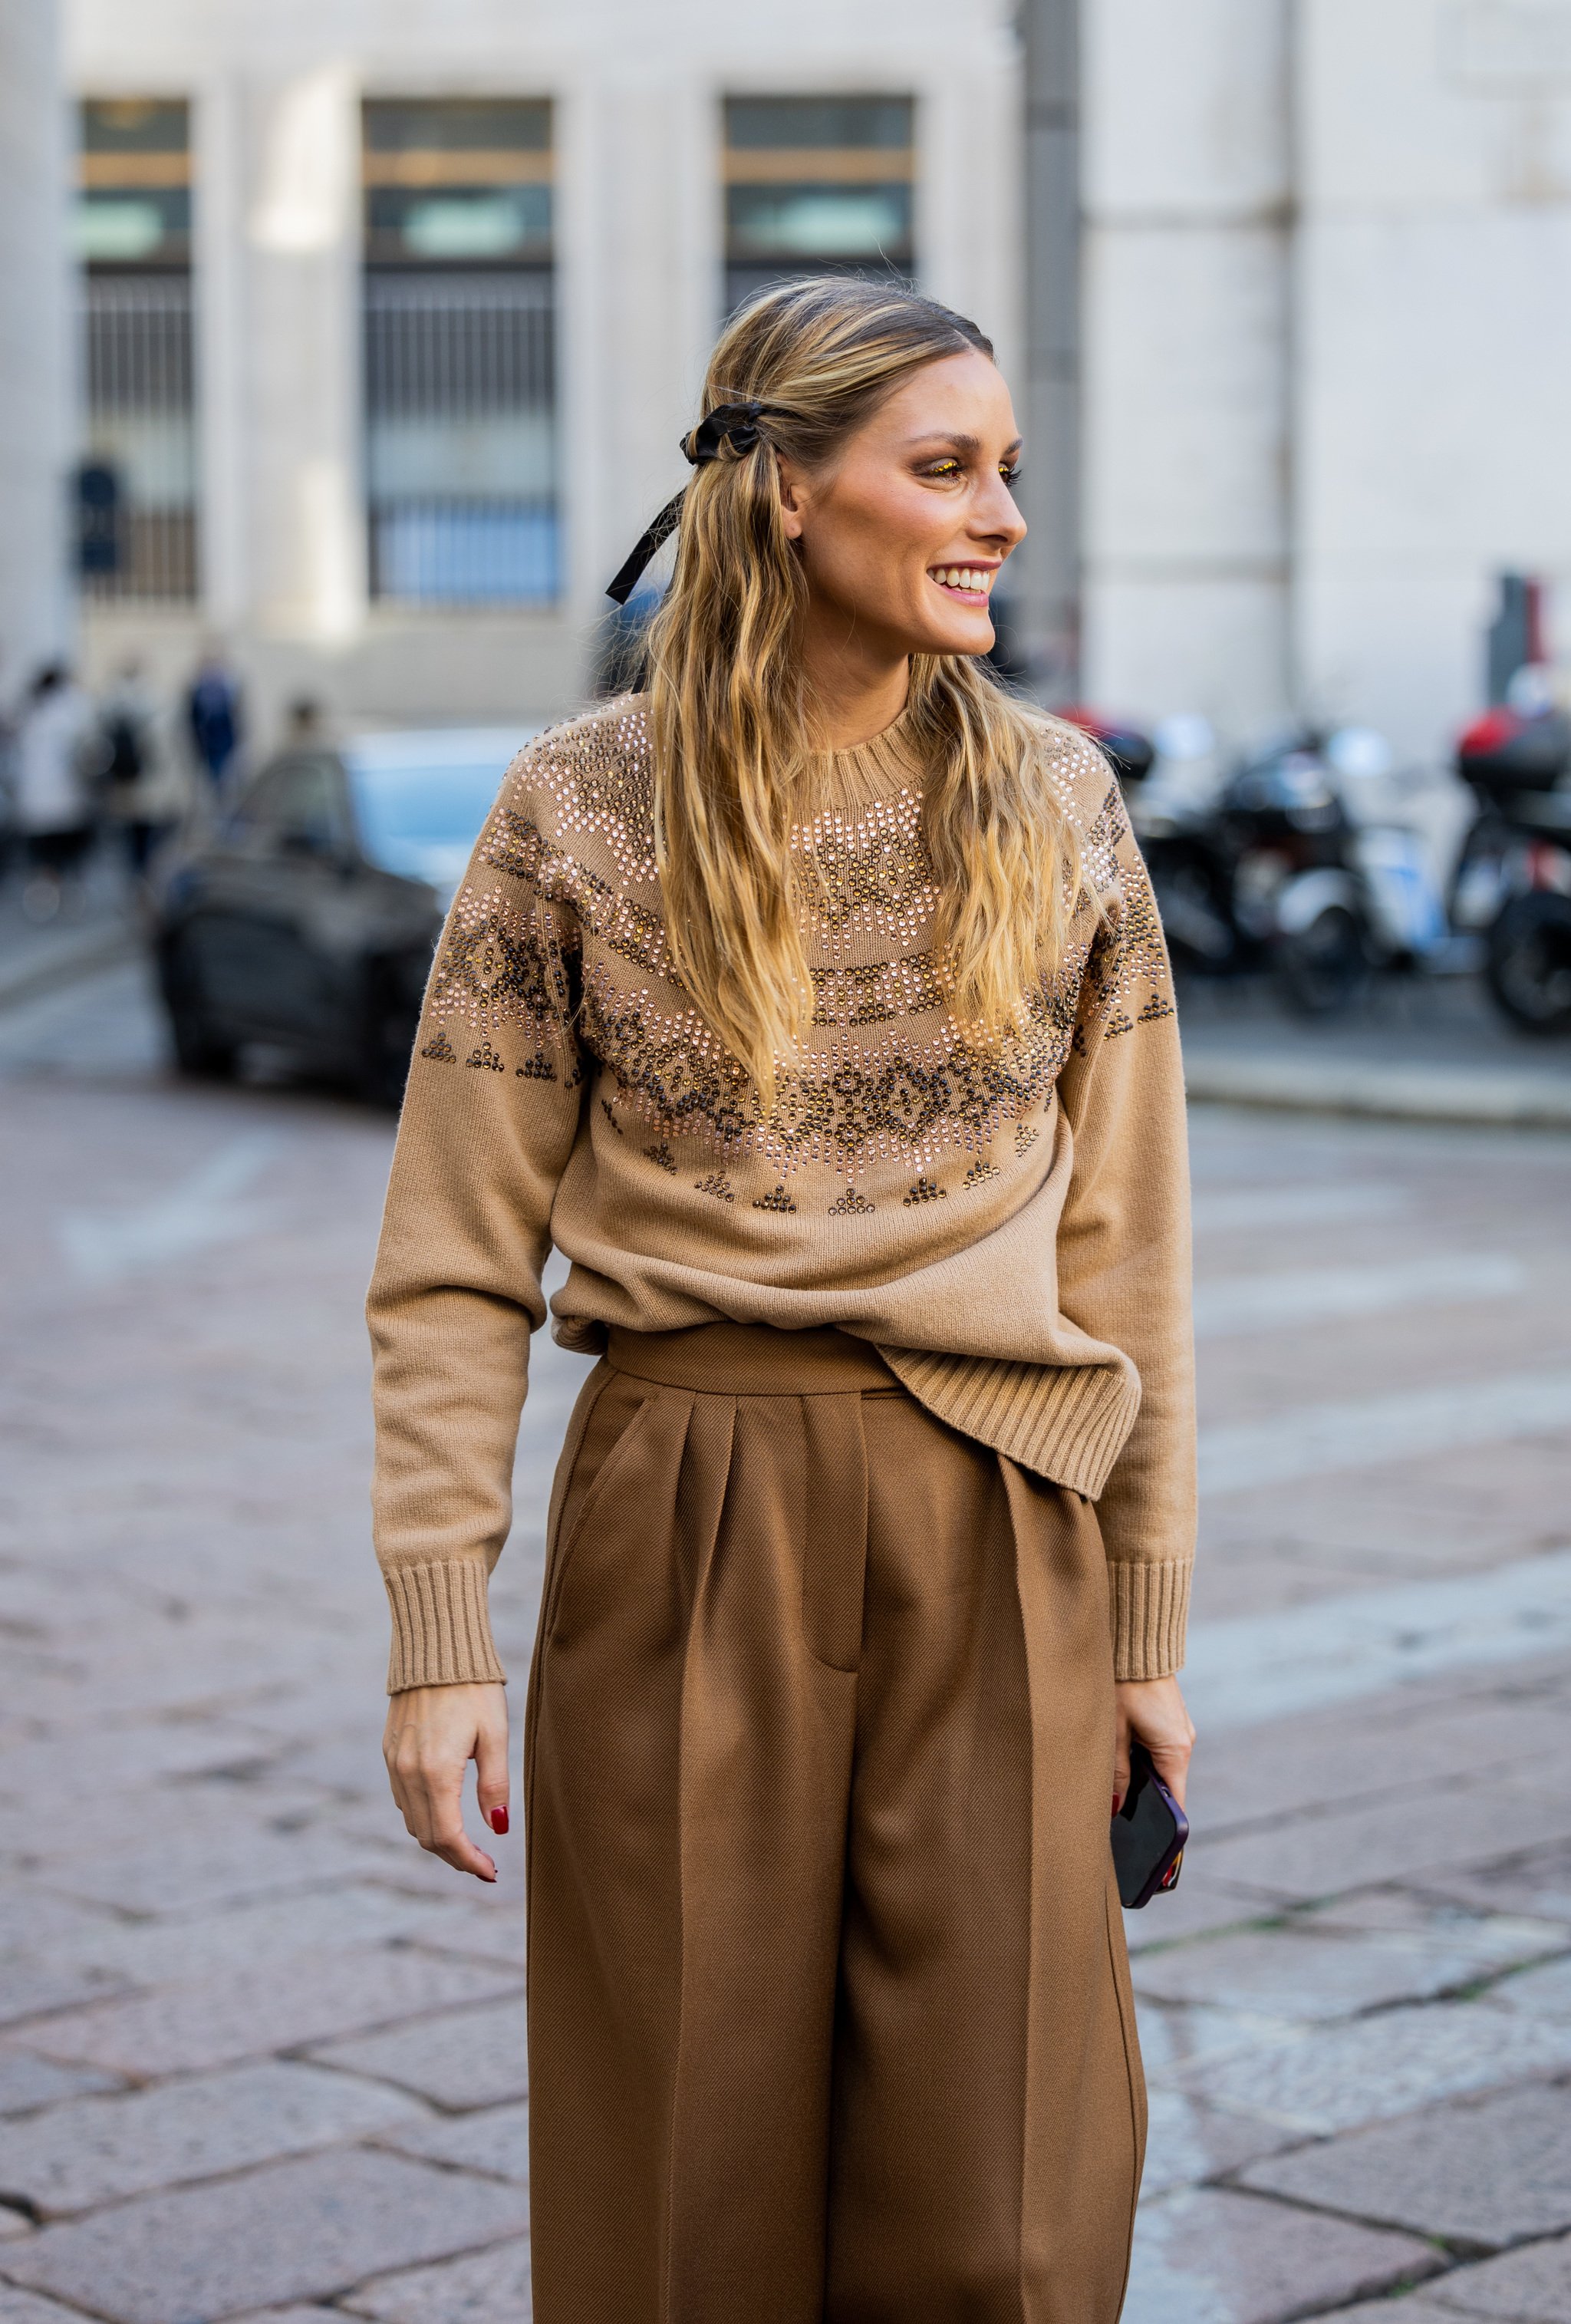 Olivia Palermo with semi-collected and bow